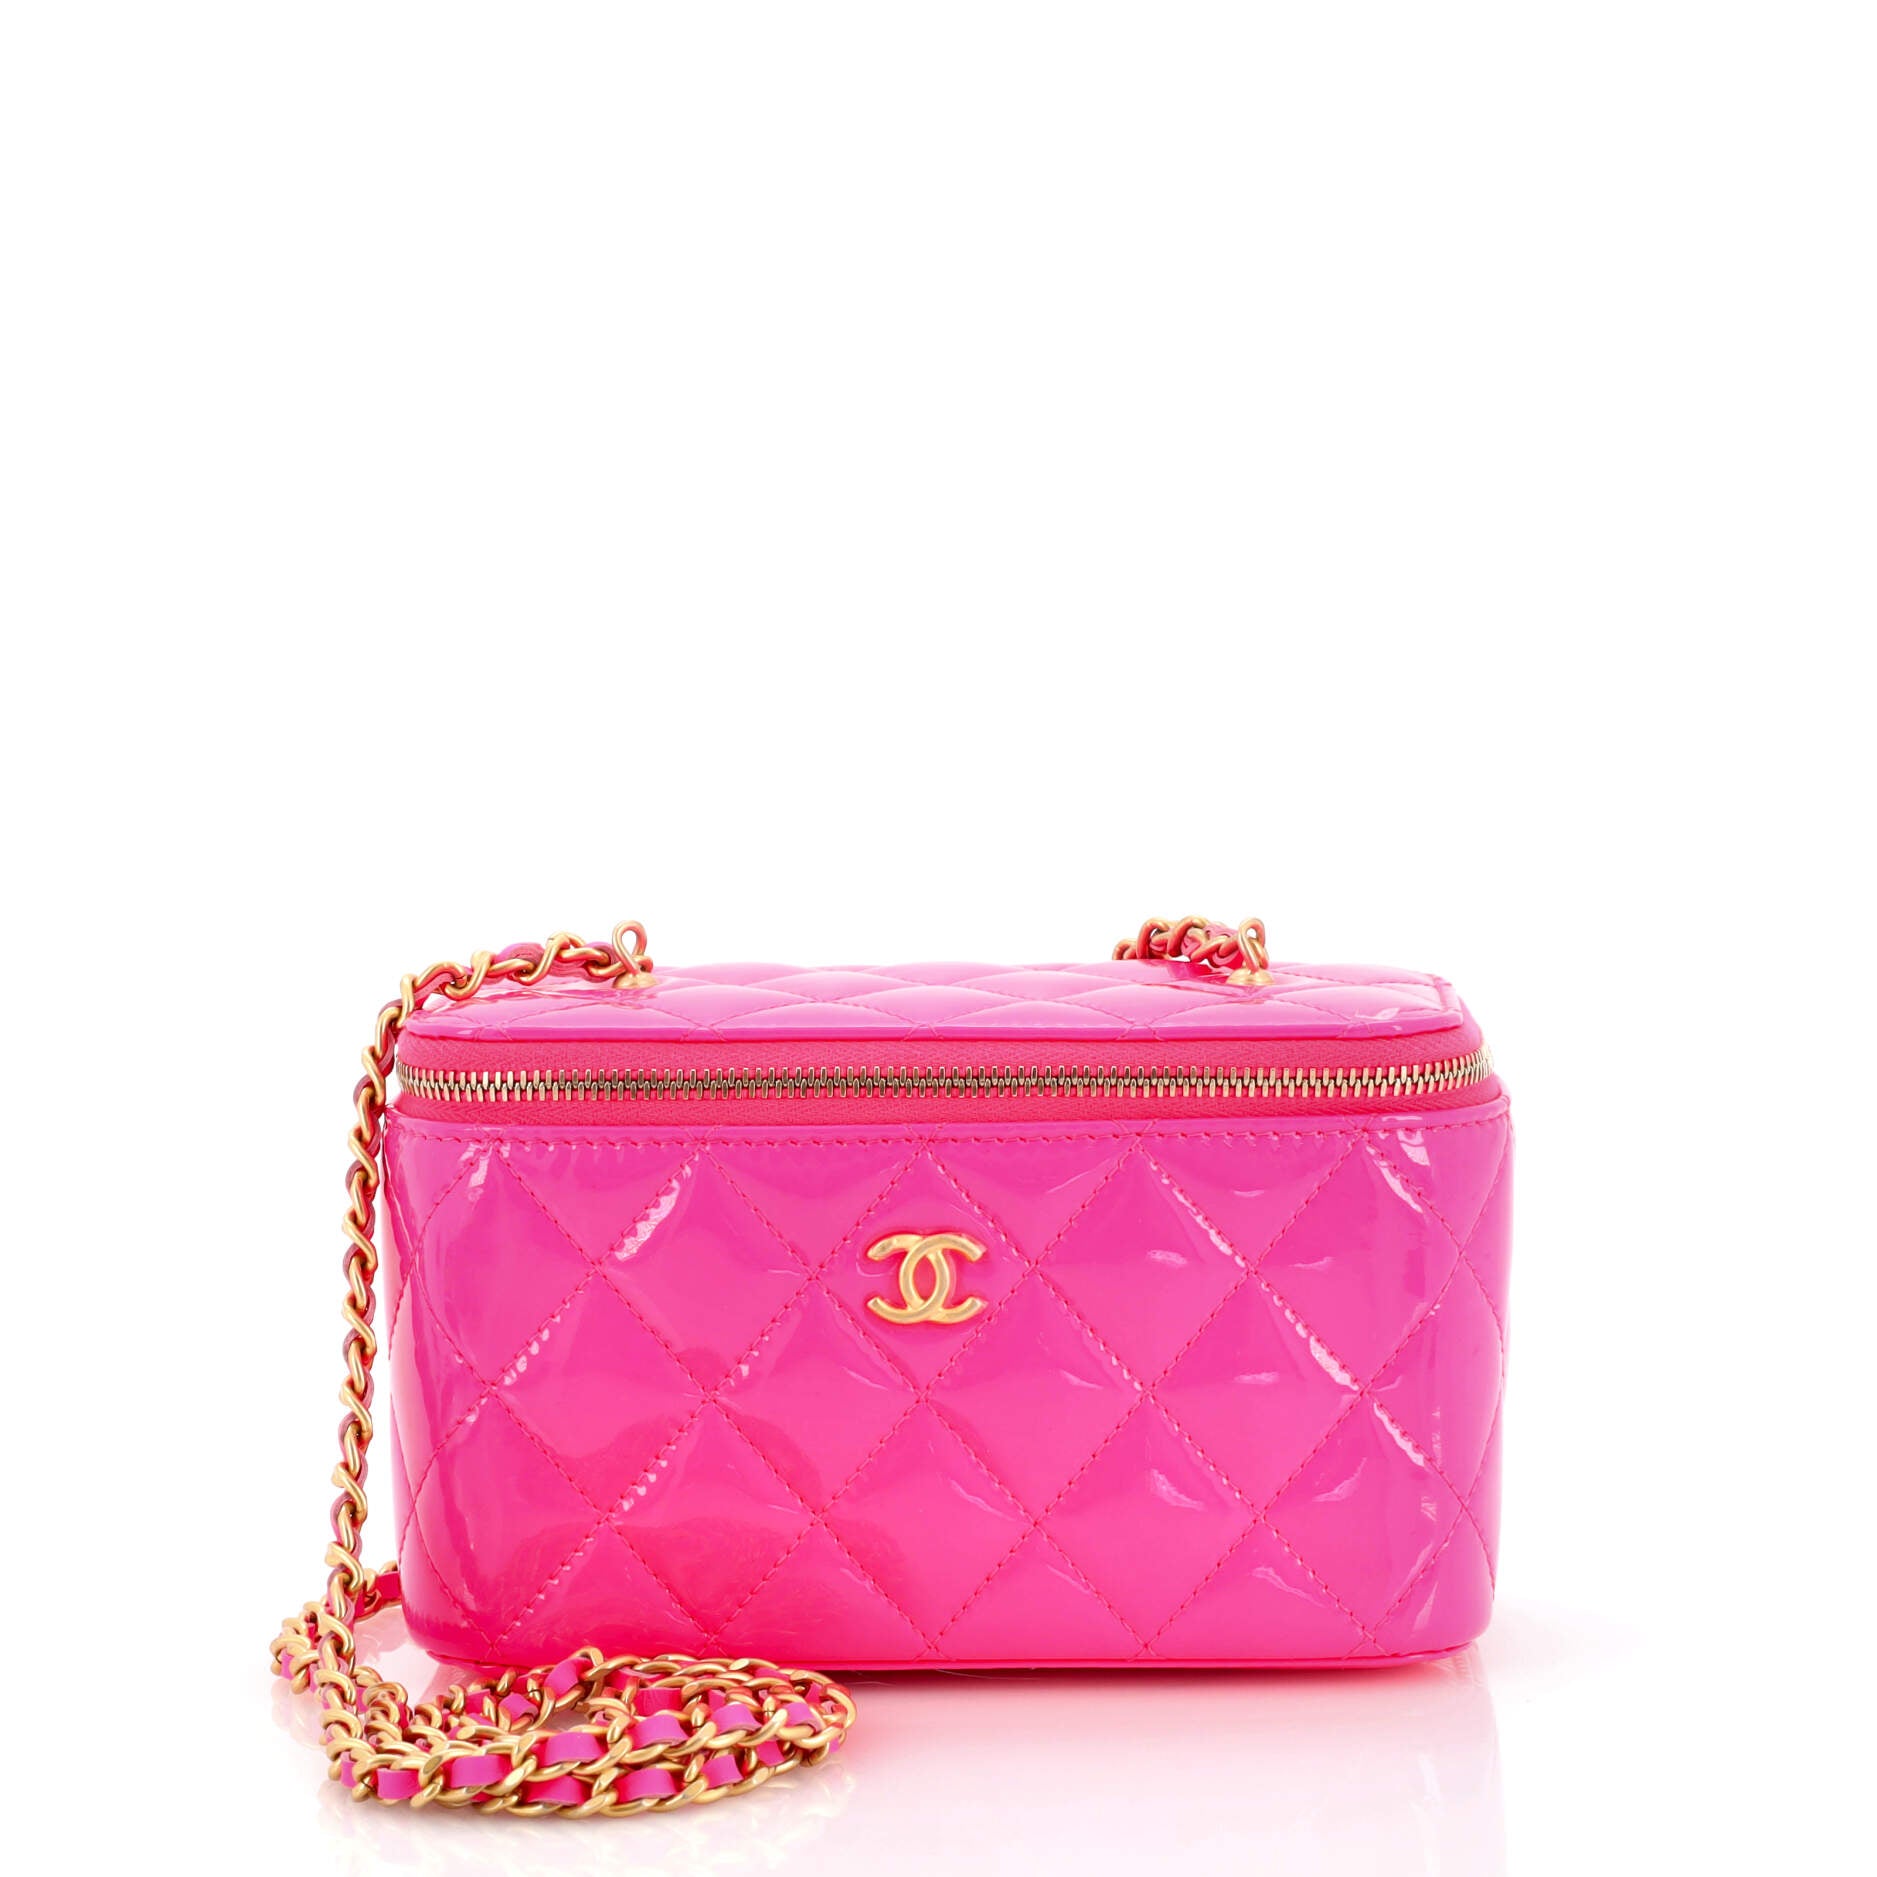 Chanel Pink Lambskin Leather Coco Pearl Crush Mini Vanity Case Chanel